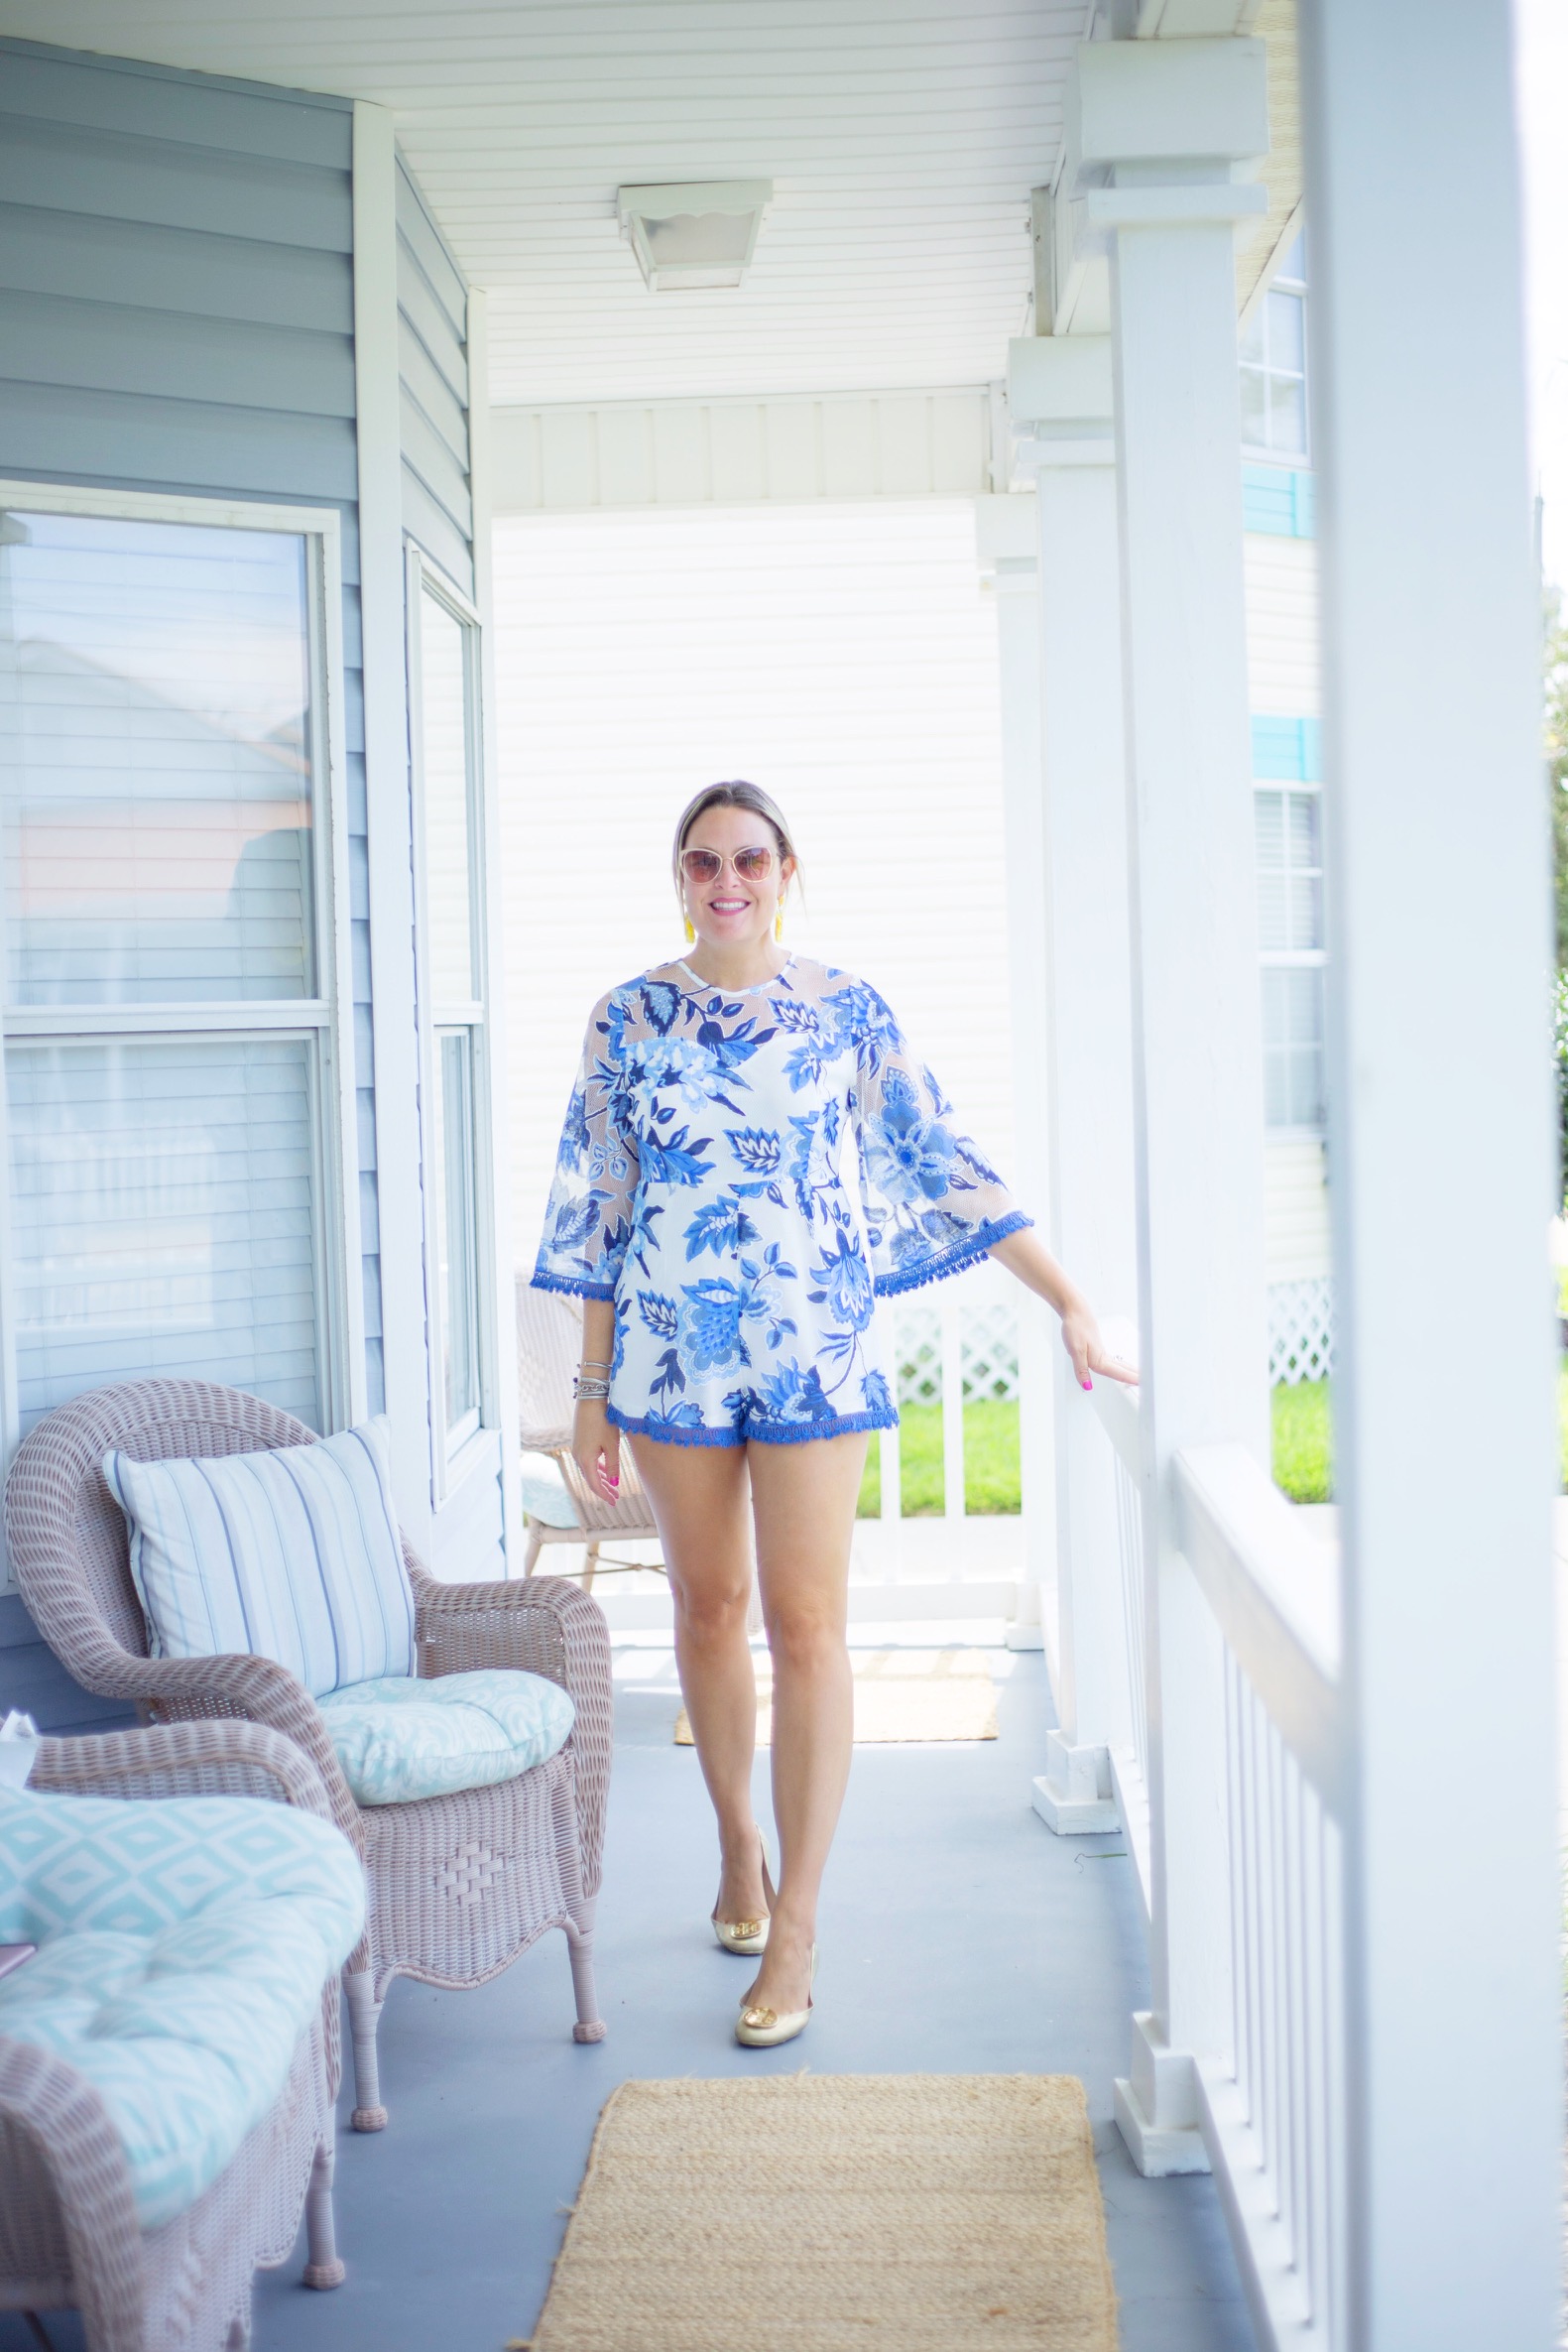 Florida lifestyle blogger, MikaelaJ, shares a beautiful blue and white summer floral romper in this weeks edition of What I'm Wearing Wednesday!